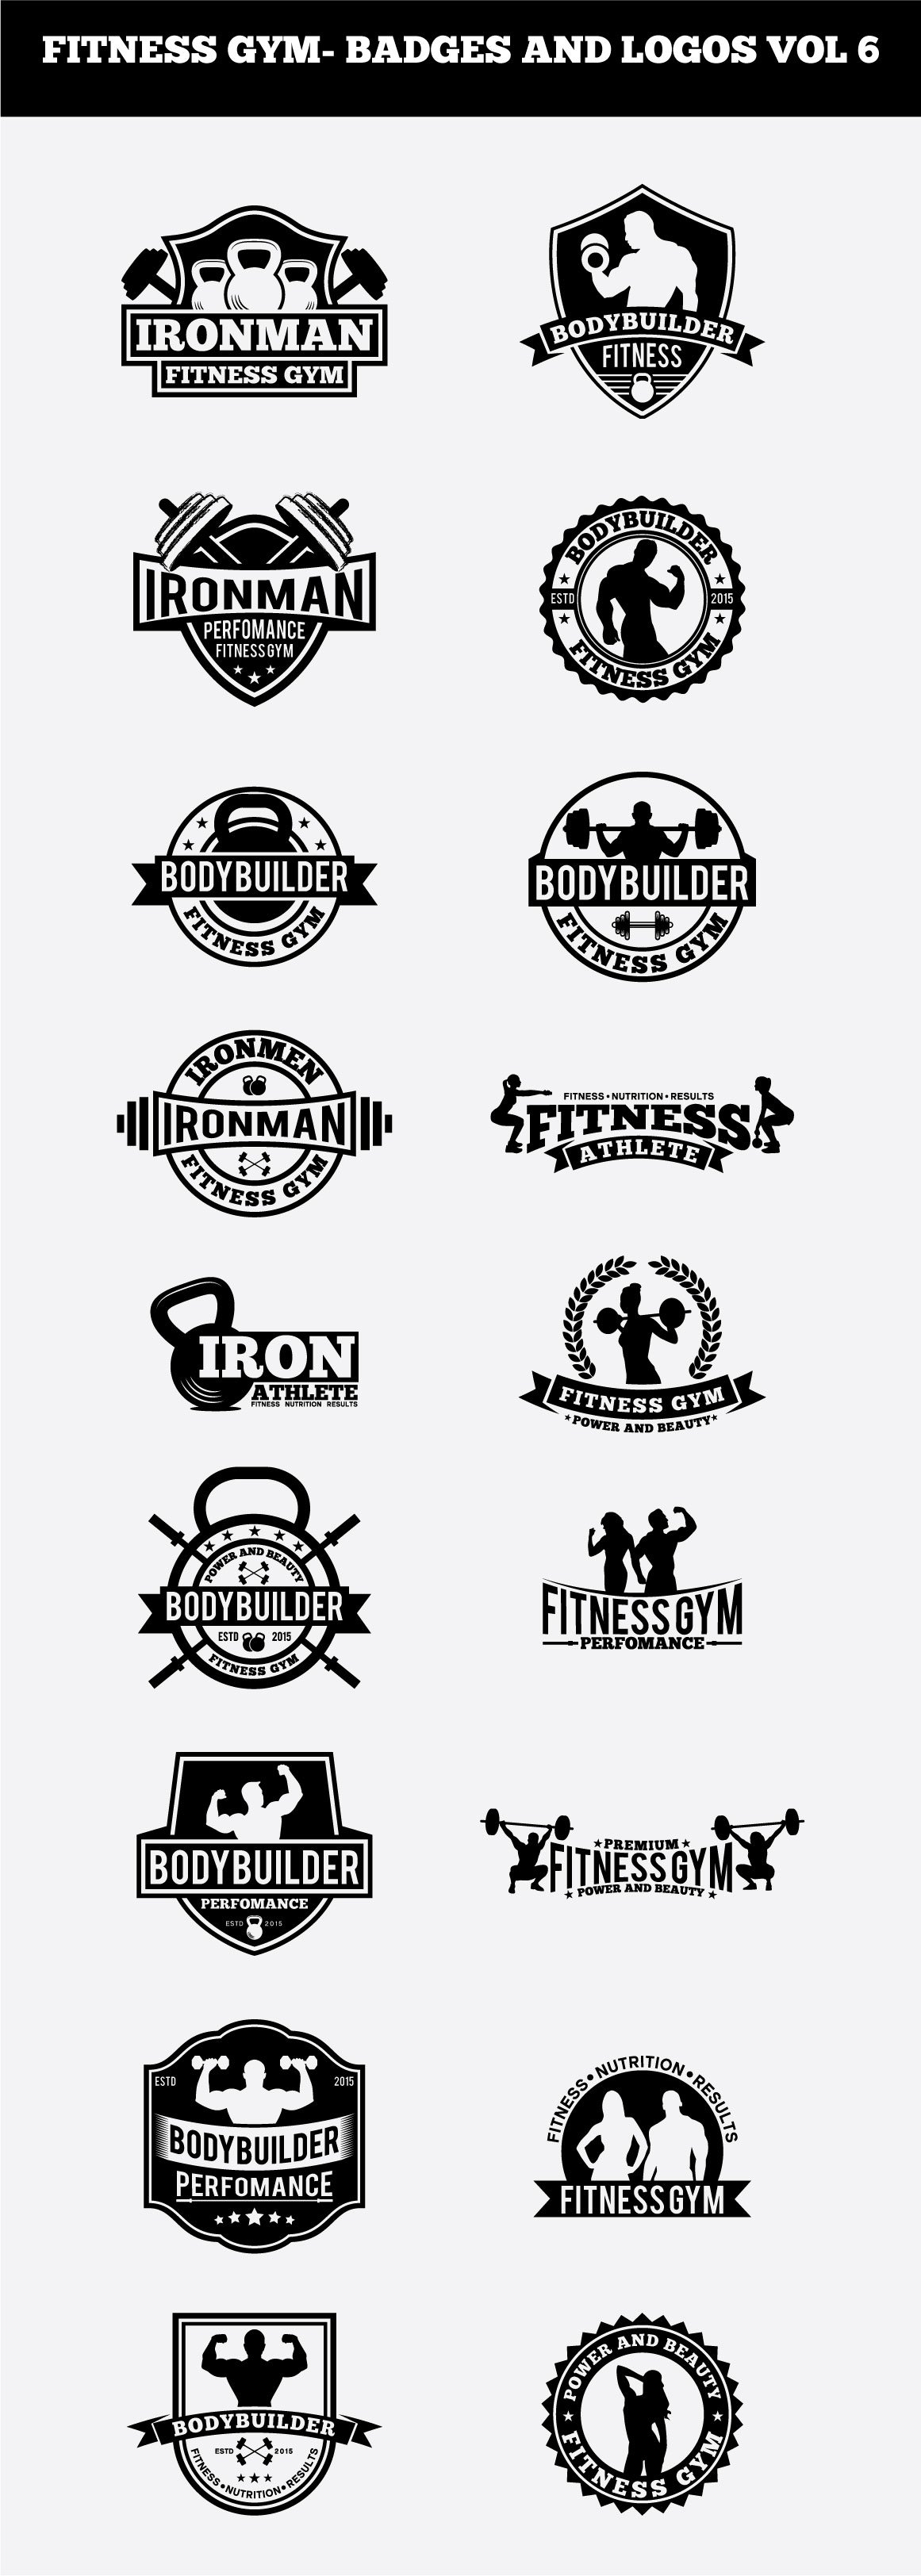 FITNESS GYM- BADGES AND LOGOS VOL 6 cover image.